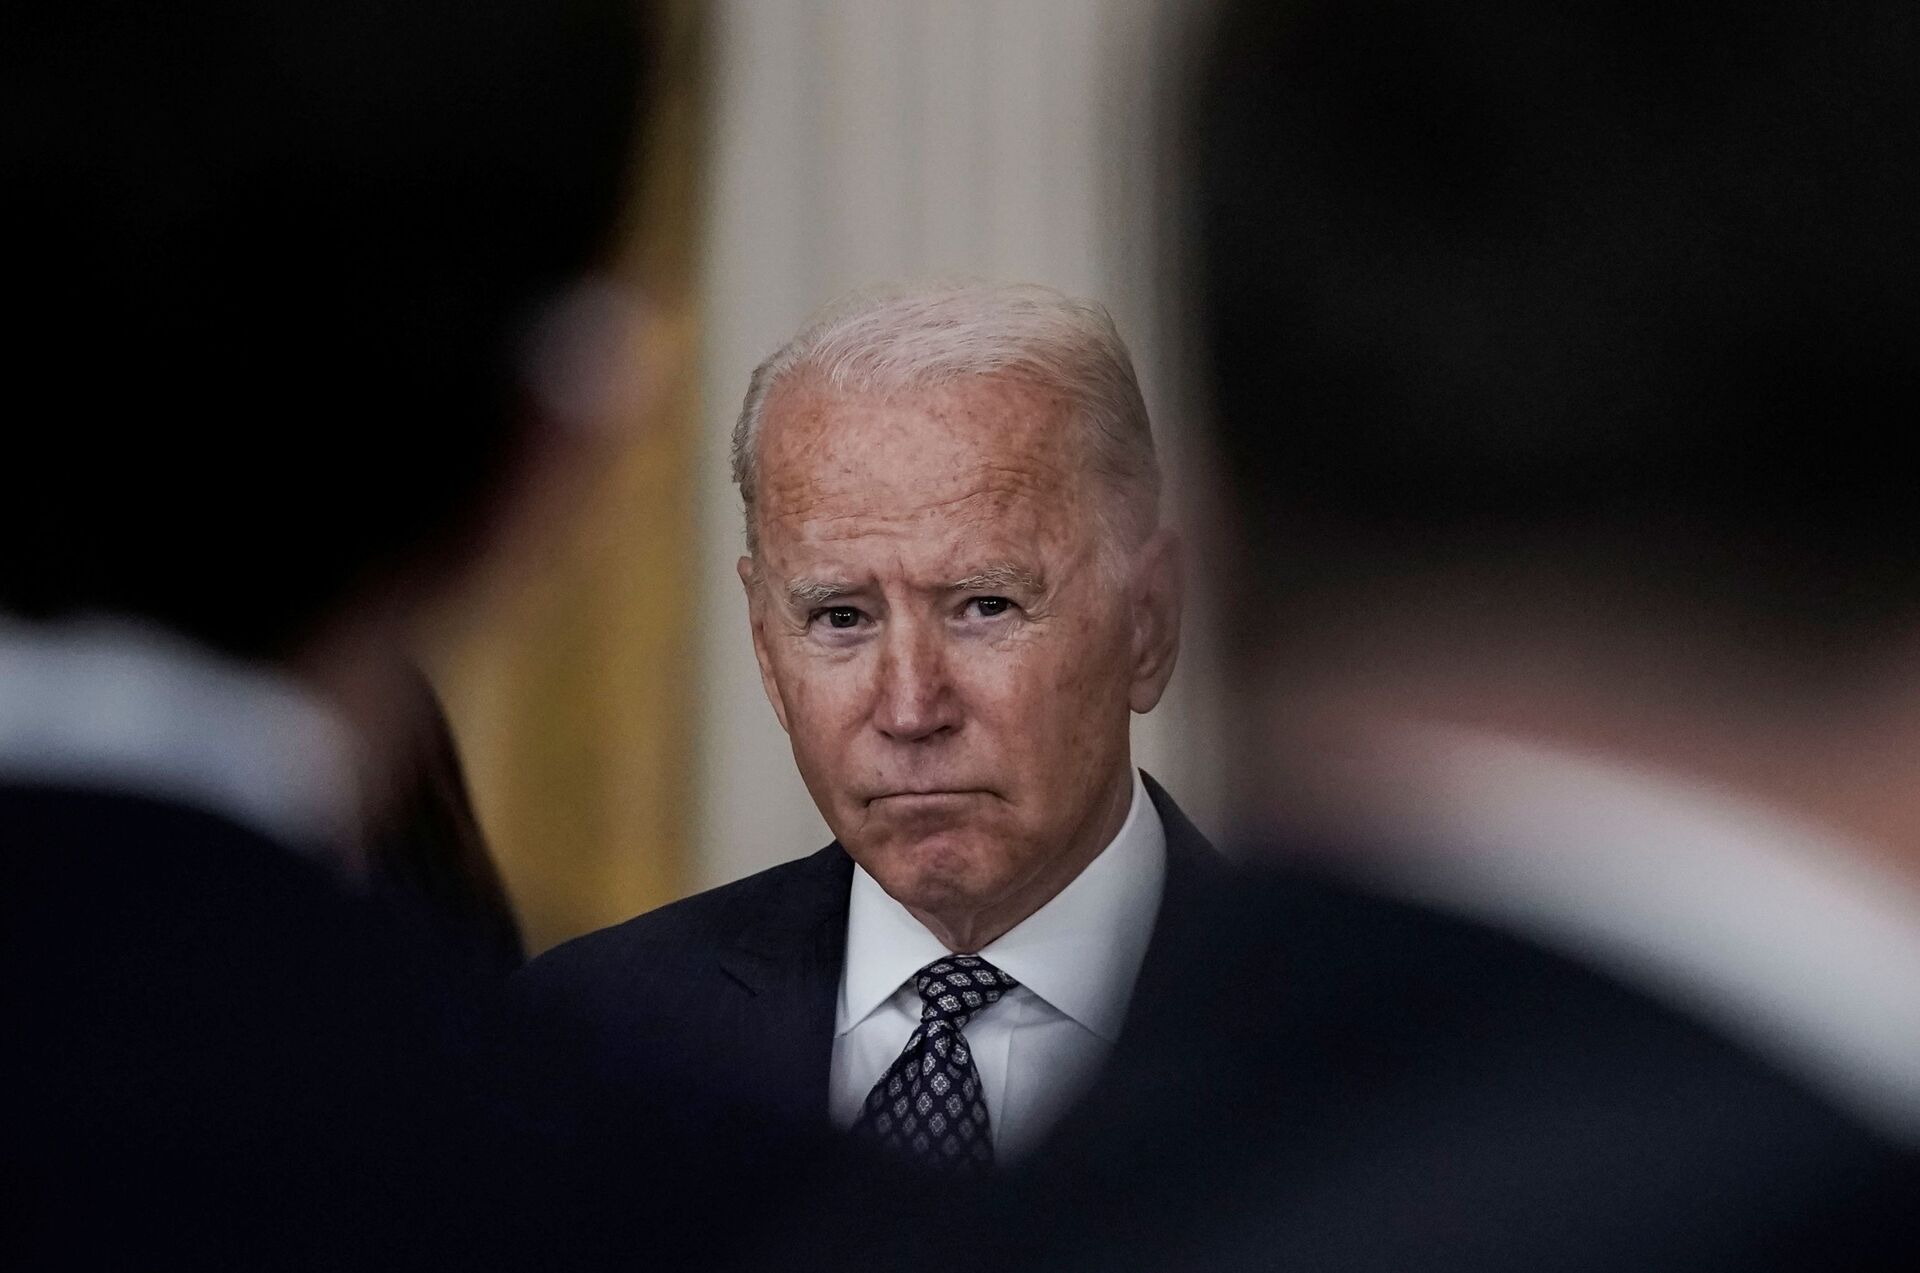 U.S.  President Joe Biden delivers remarks on evacuation efforts and the ongoing situation in Afghanistan during a speech in the East Room at the White House in Washington, U.S., August 20, 2021 - Sputnik International, 1920, 07.09.2021